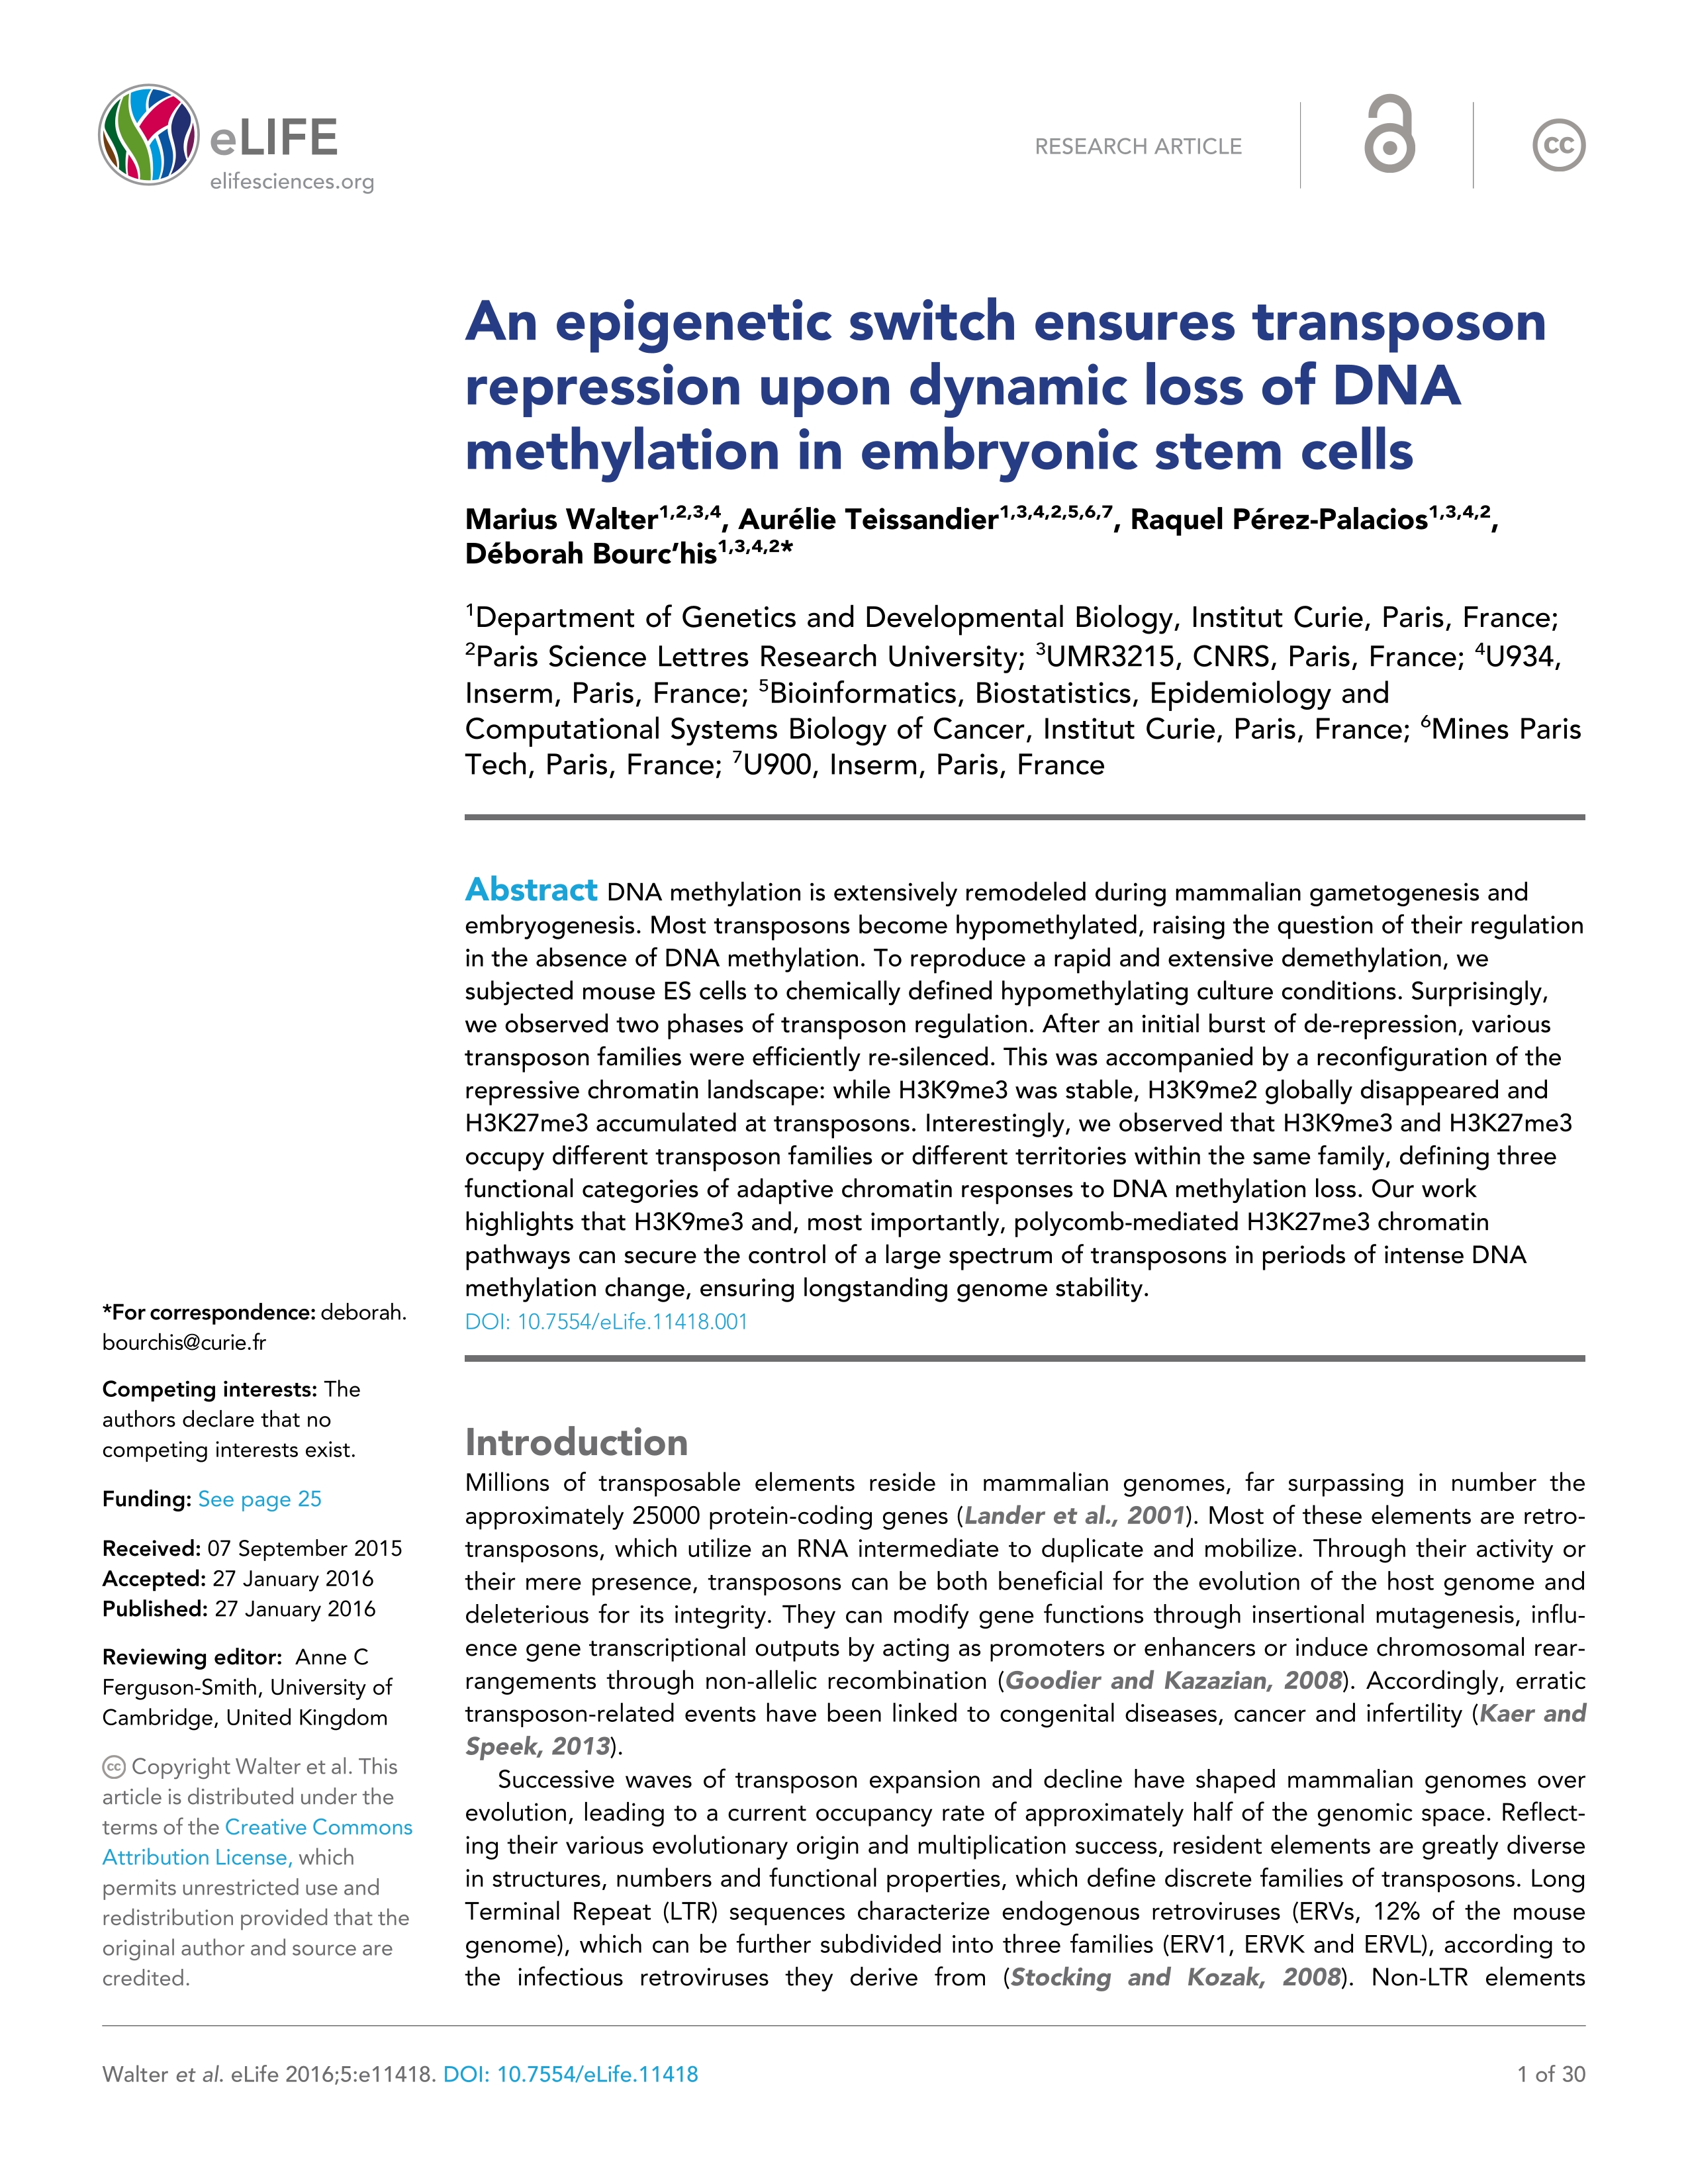 An epigenetic switch ensures transposon repression upon dynamic loss of DNA methylation in embryonic stem cells